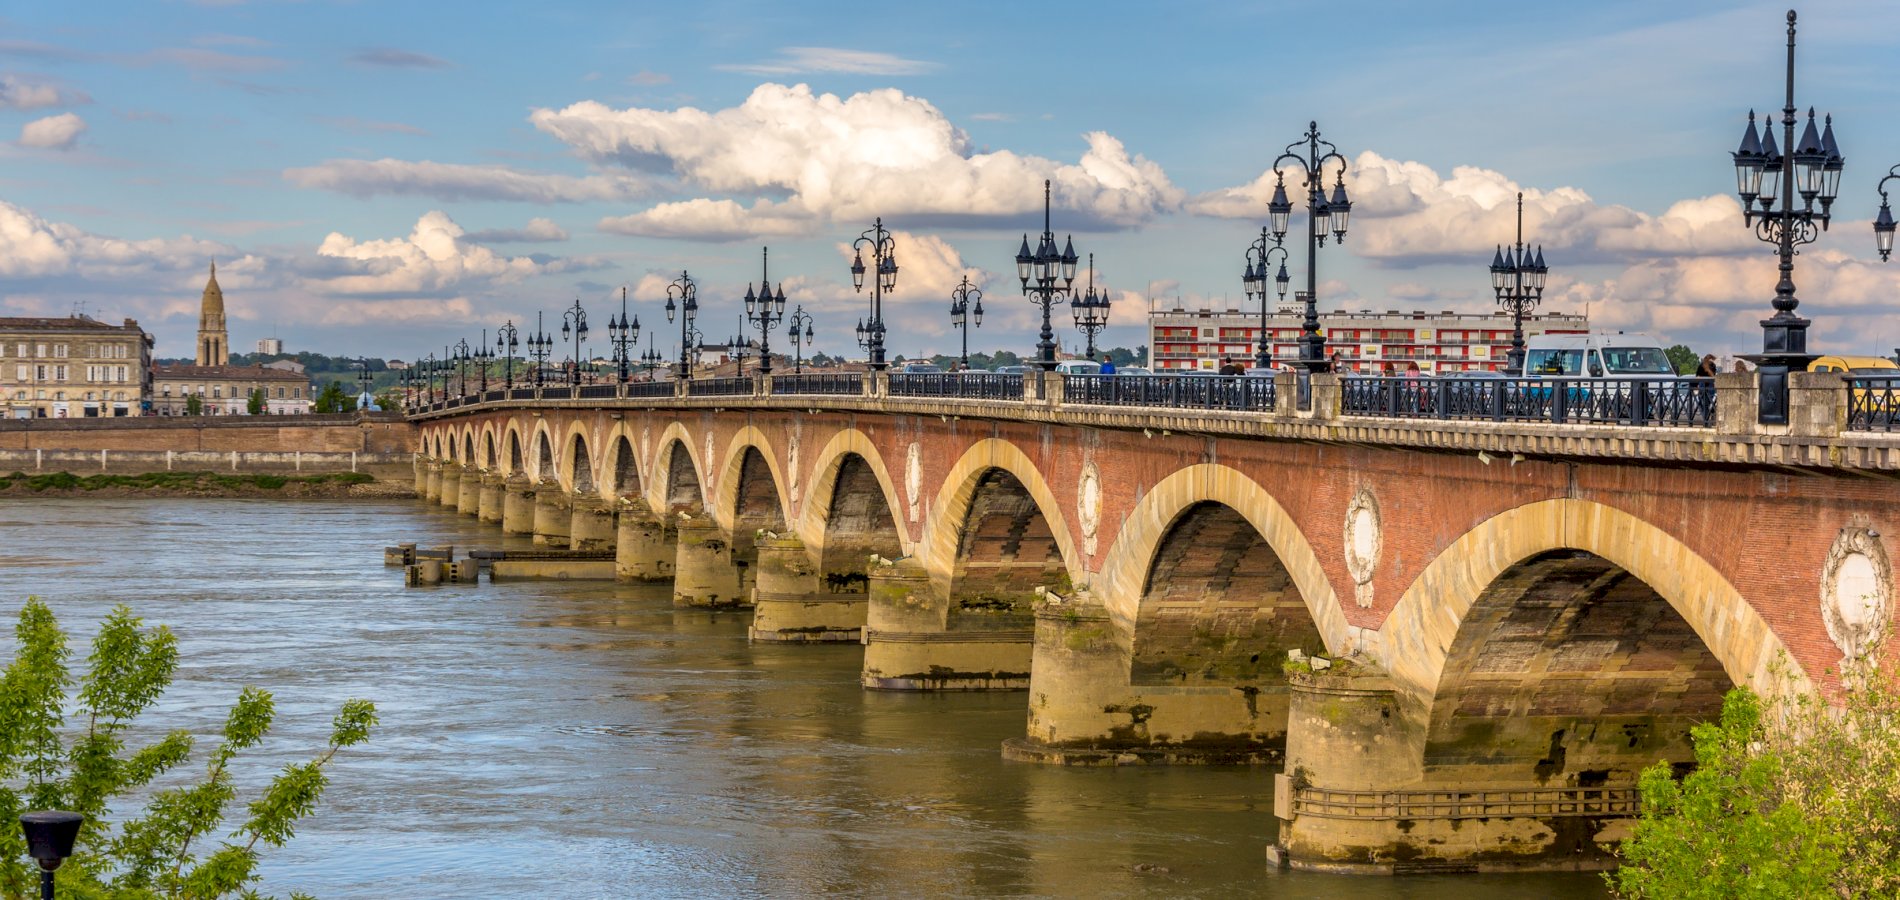 Ophorus Tours - 4 Days Small Group Bordeaux Wine Tour Packages - 3* Hotel